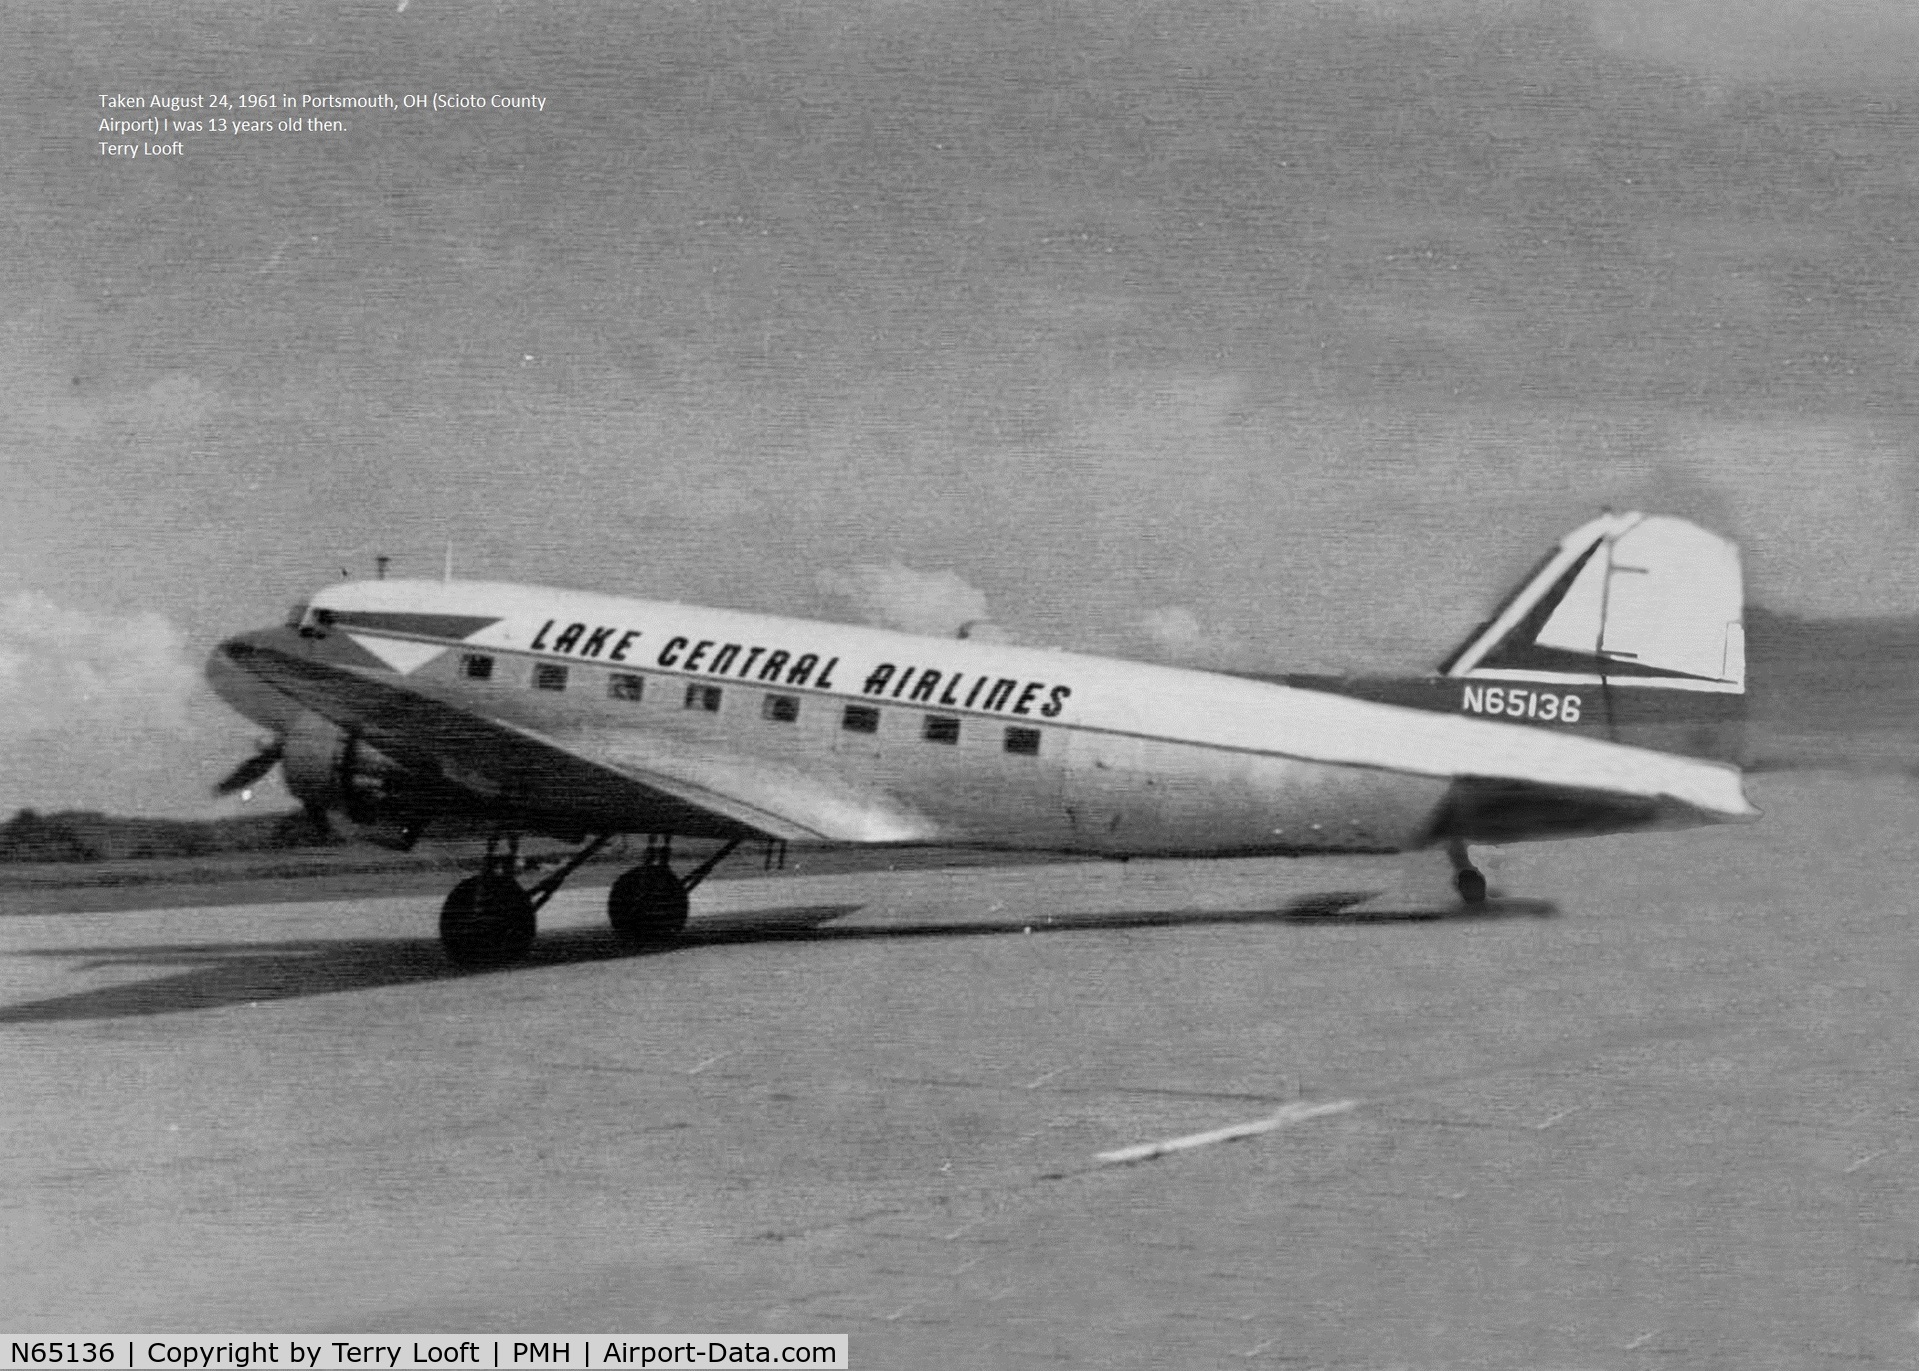 N65136, 1946 Douglas DC3A C/N 19648, Taken August 24, 1961 in Portsmouth, OH (Scioto County Airport) I was 13 years old then. 
Terry Looft tlooft at earthlink.net